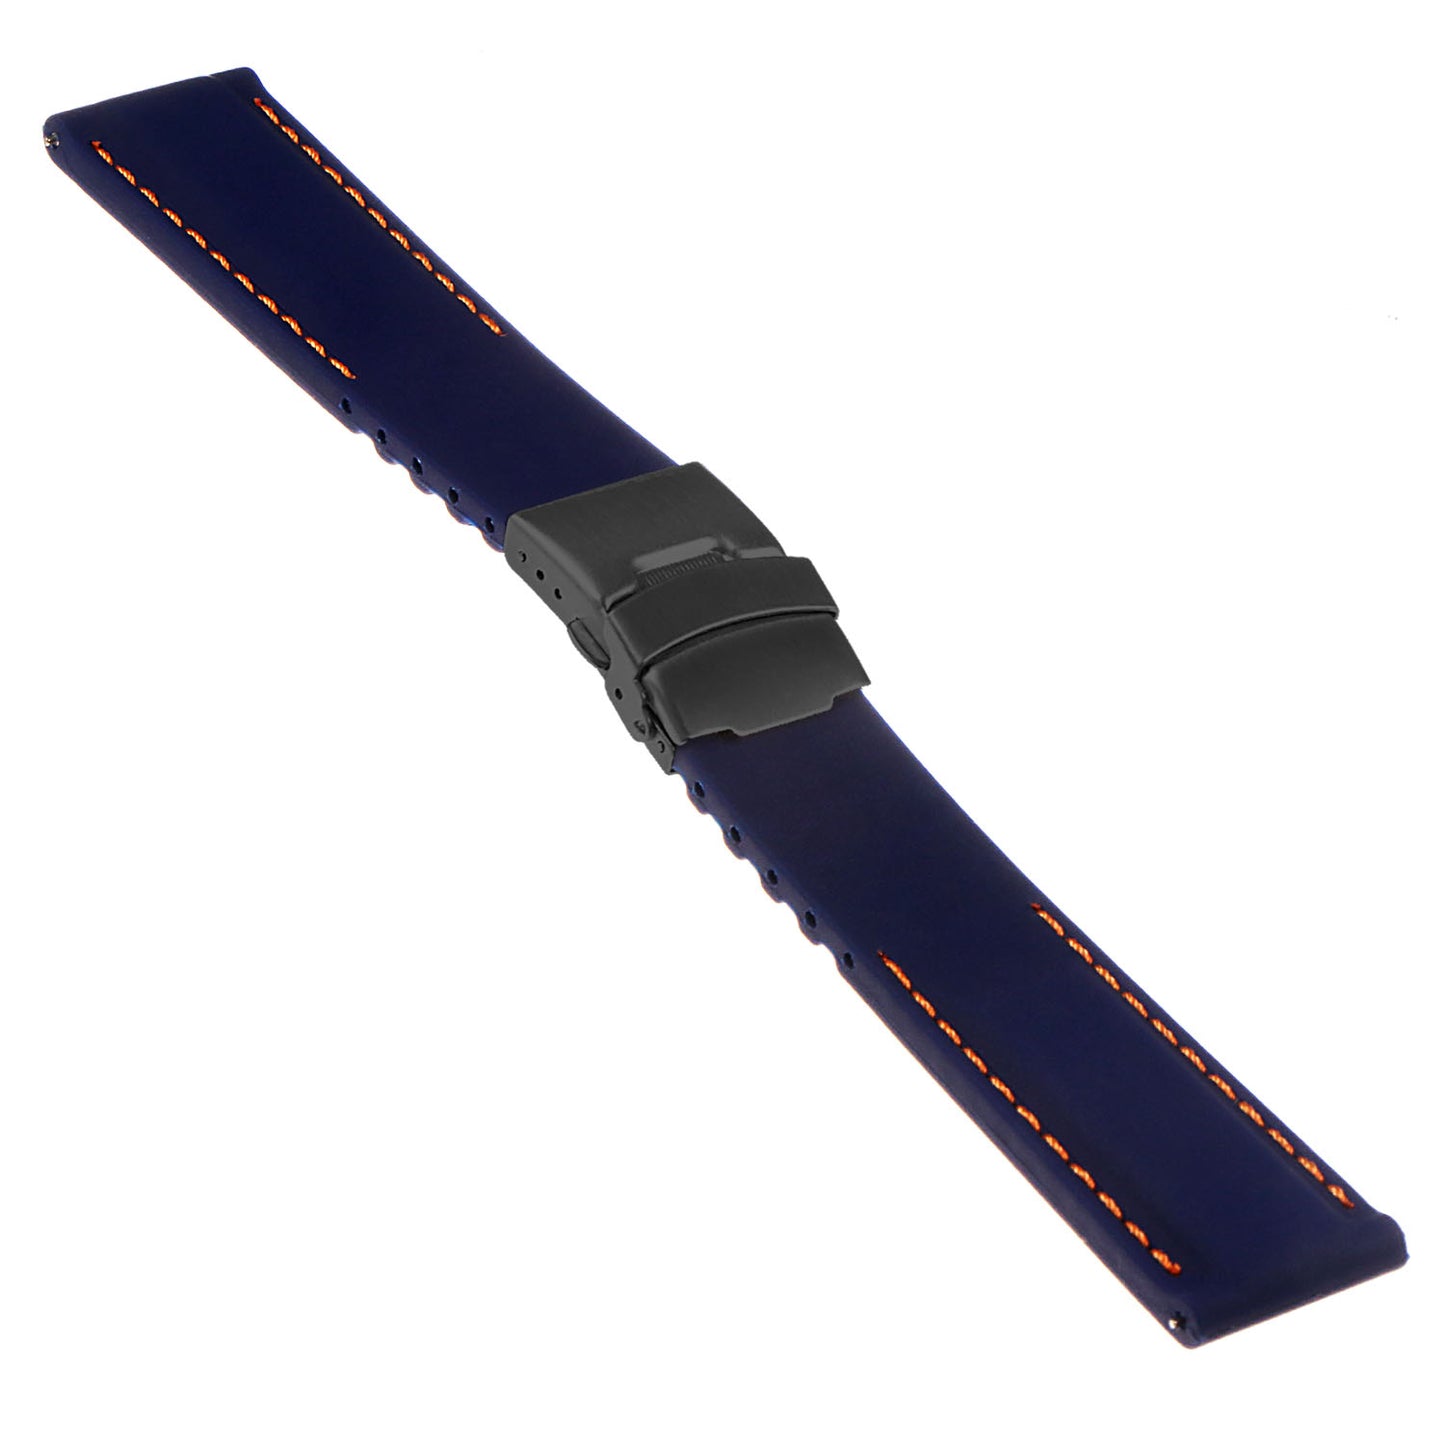 Rubber Strap with Black Buckle for Garmin Forerunner 220 / 230 / 235 / 260 / 735XT / Approach S5 / S6 / S20